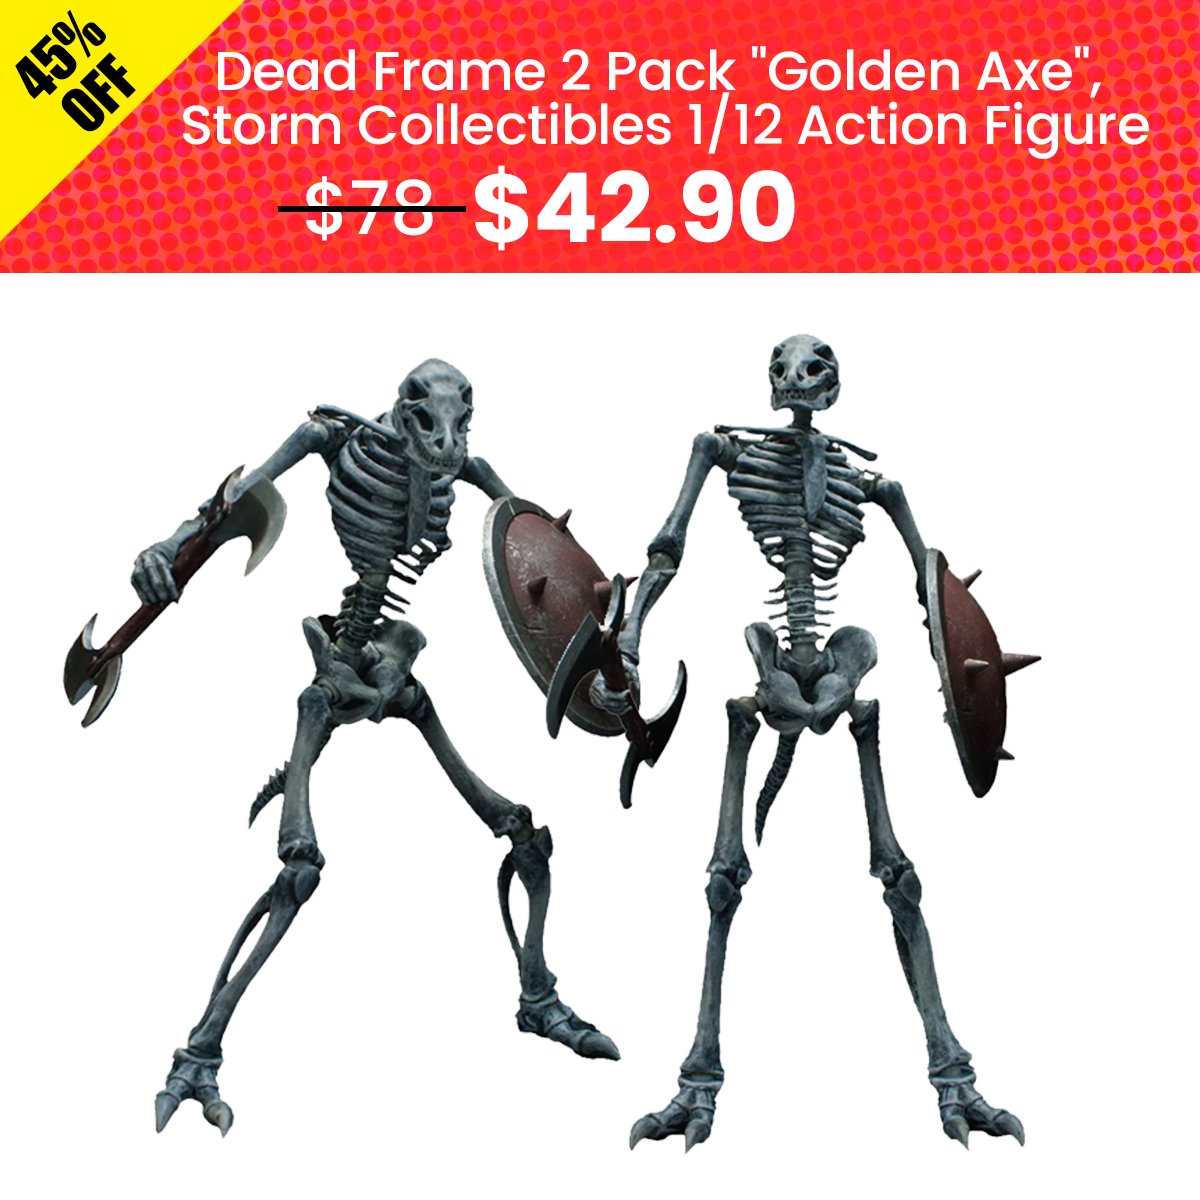 What's better than one figure? Two figures! Dead Frame 2 pack includes two Dead Frame skeleton action figures for only $42.90. This special offer is only available during our Black Friday Sale. 🦴bit.ly/3i83mTs #GoldenAxe #BlackFridaySale